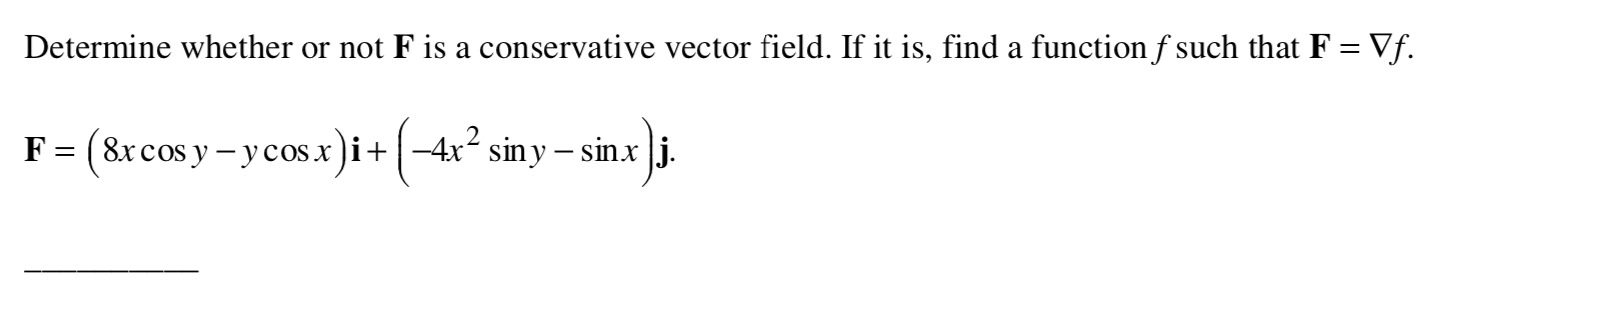 Determine whether or not F is a conservative vector field. If it is, find a function f such that F = Vf.
F= (8xcos y - ycosx)i+|-4x siny – sinx |j.
